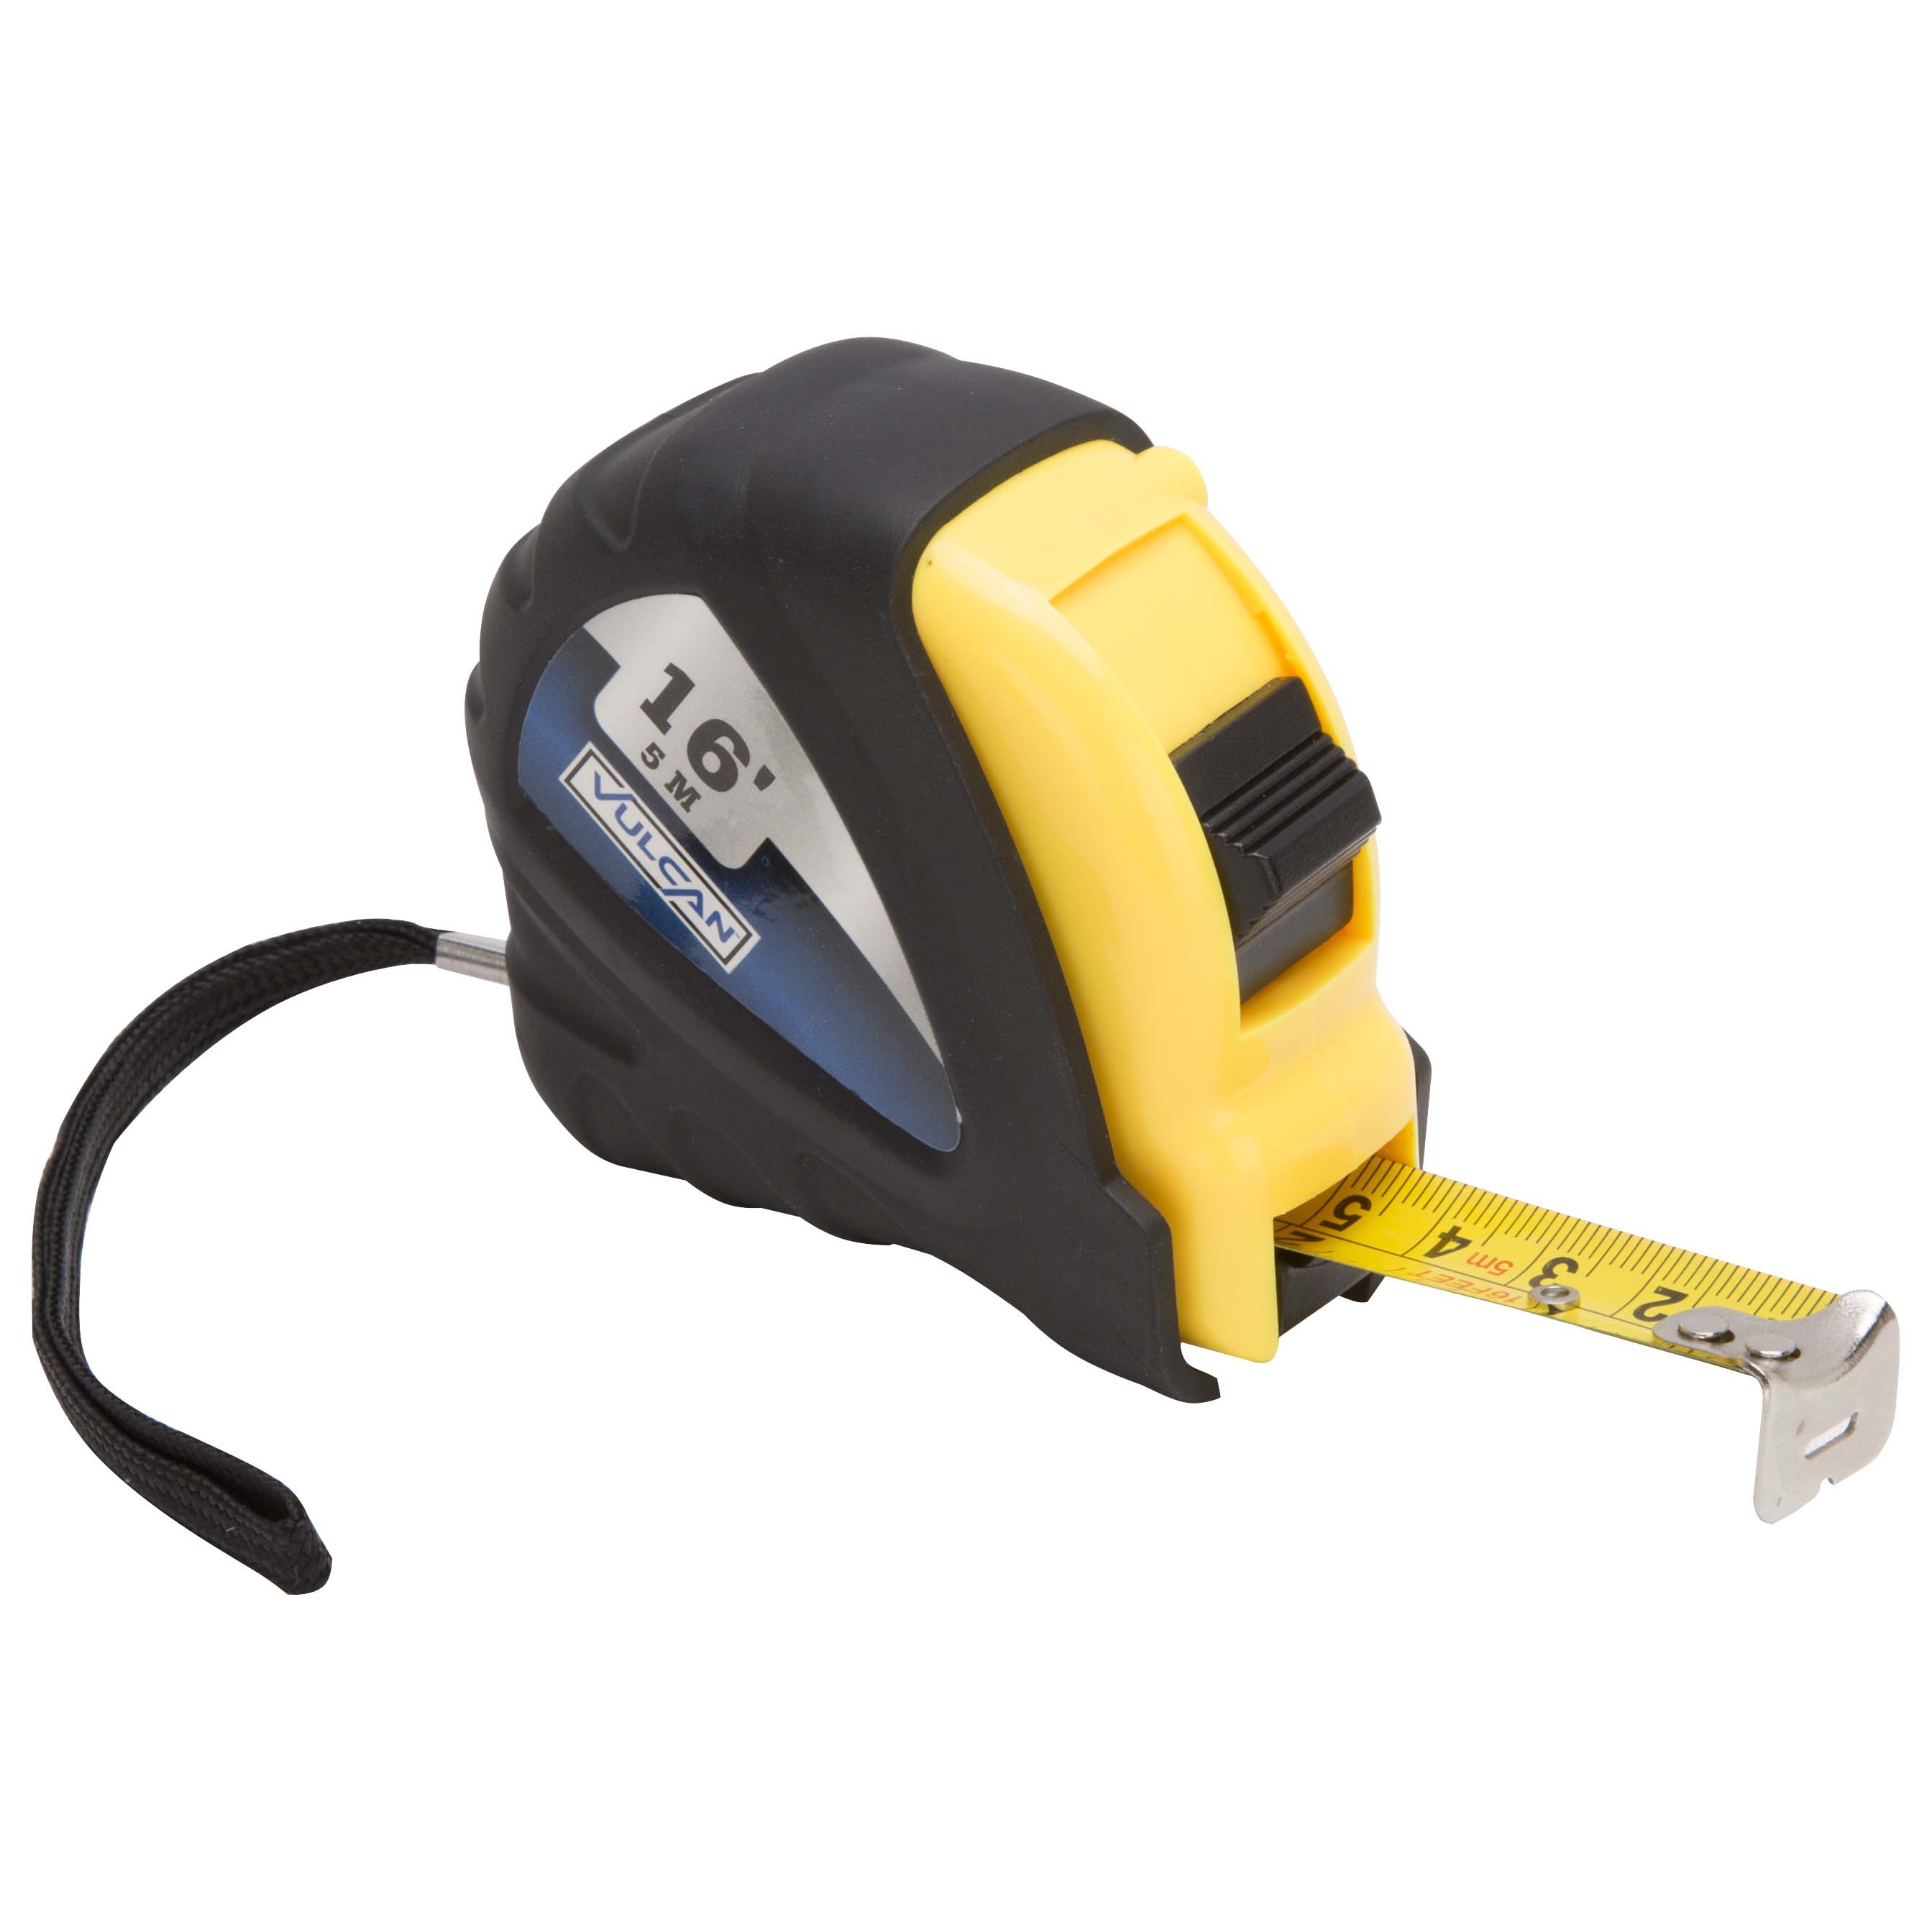 56-5X19-A Tape Measure, 16 ft L Blade, 3/4 in W Blade, Steel Blade, ABS Plastic Case, Yellow Case